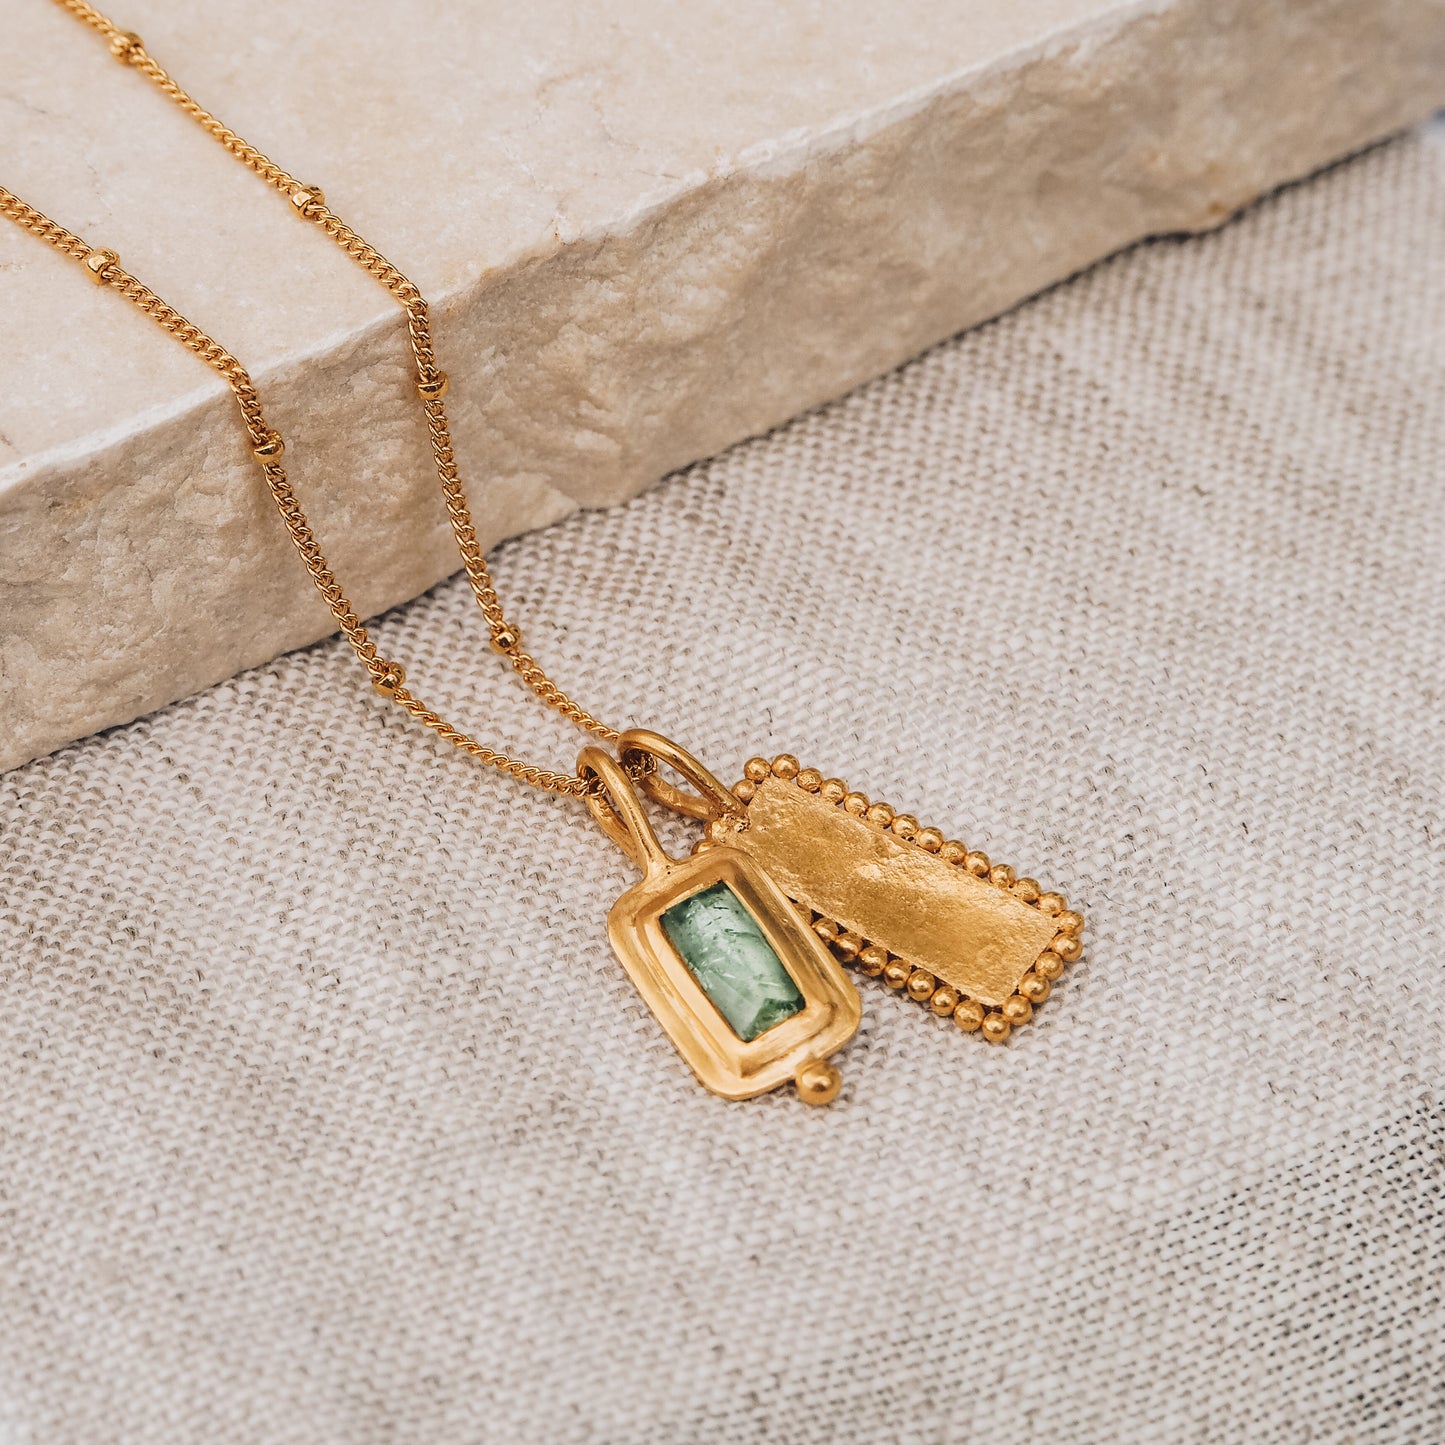 Handmade square gold pendant featuring a captivating blue rose cut tourmaline gemstone and meticulous granulation detail, suspended from a delicate satellite chain.